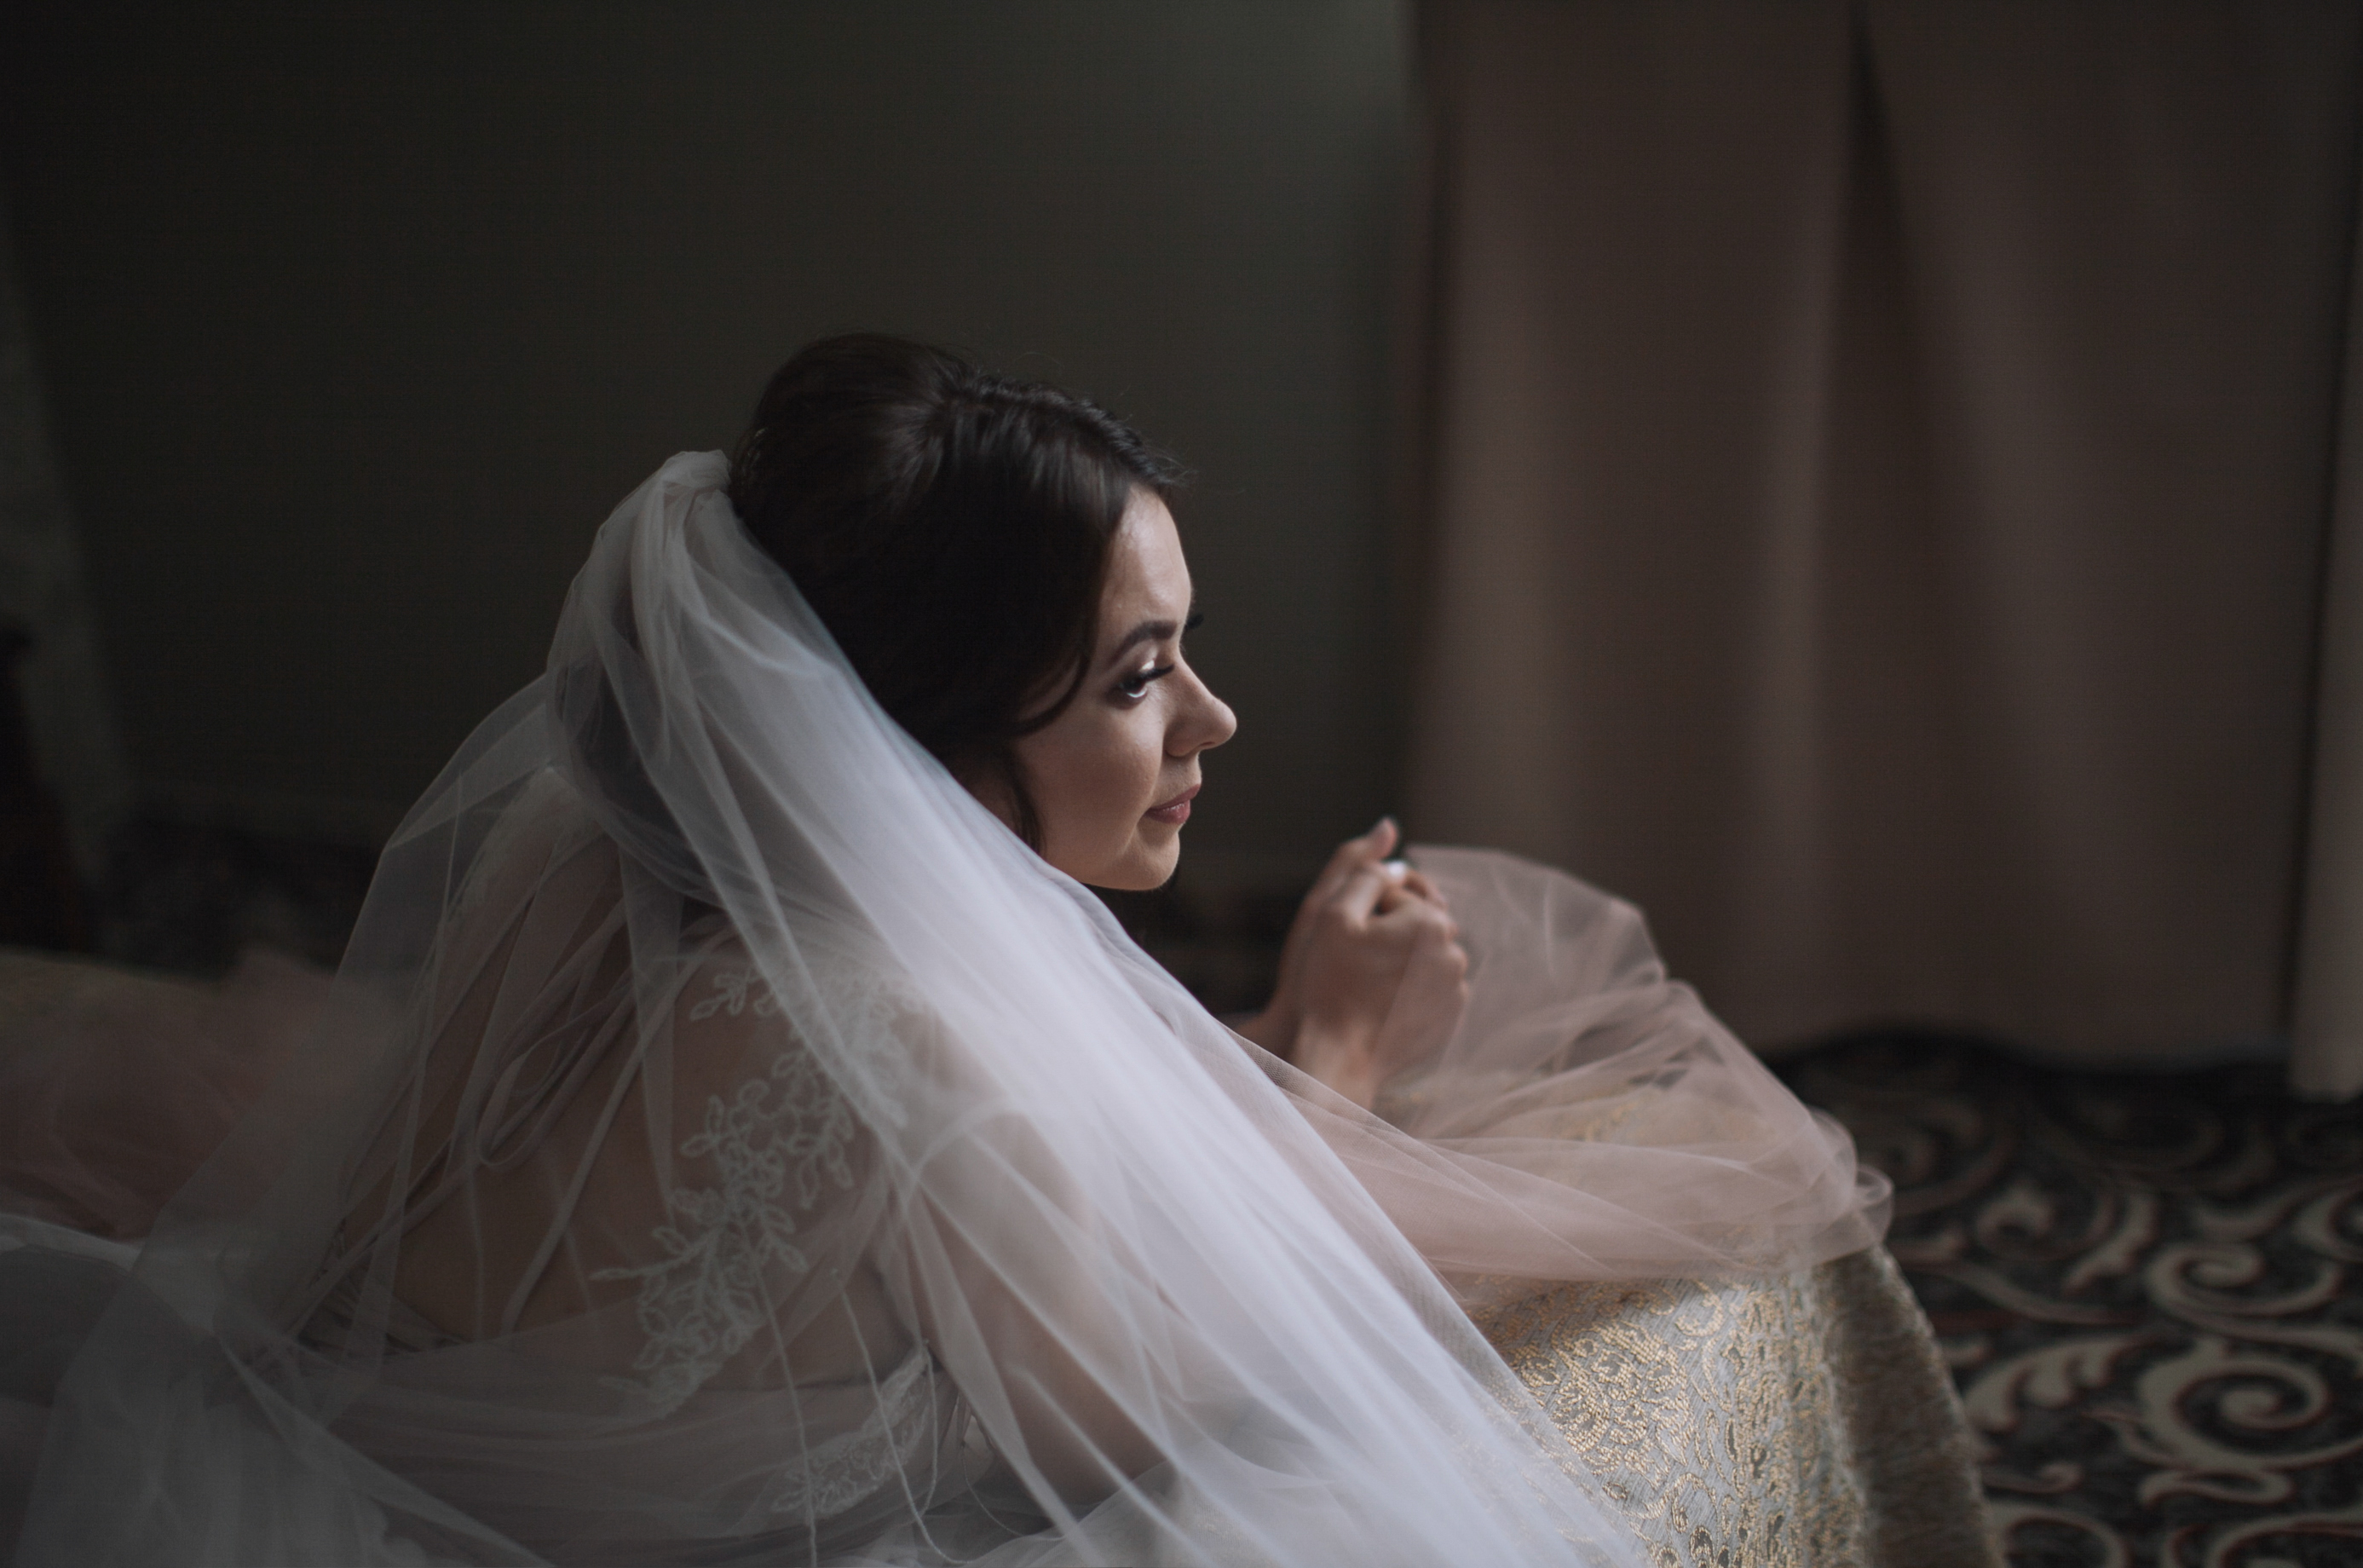 A stressed out bride | Source: Shutterstock